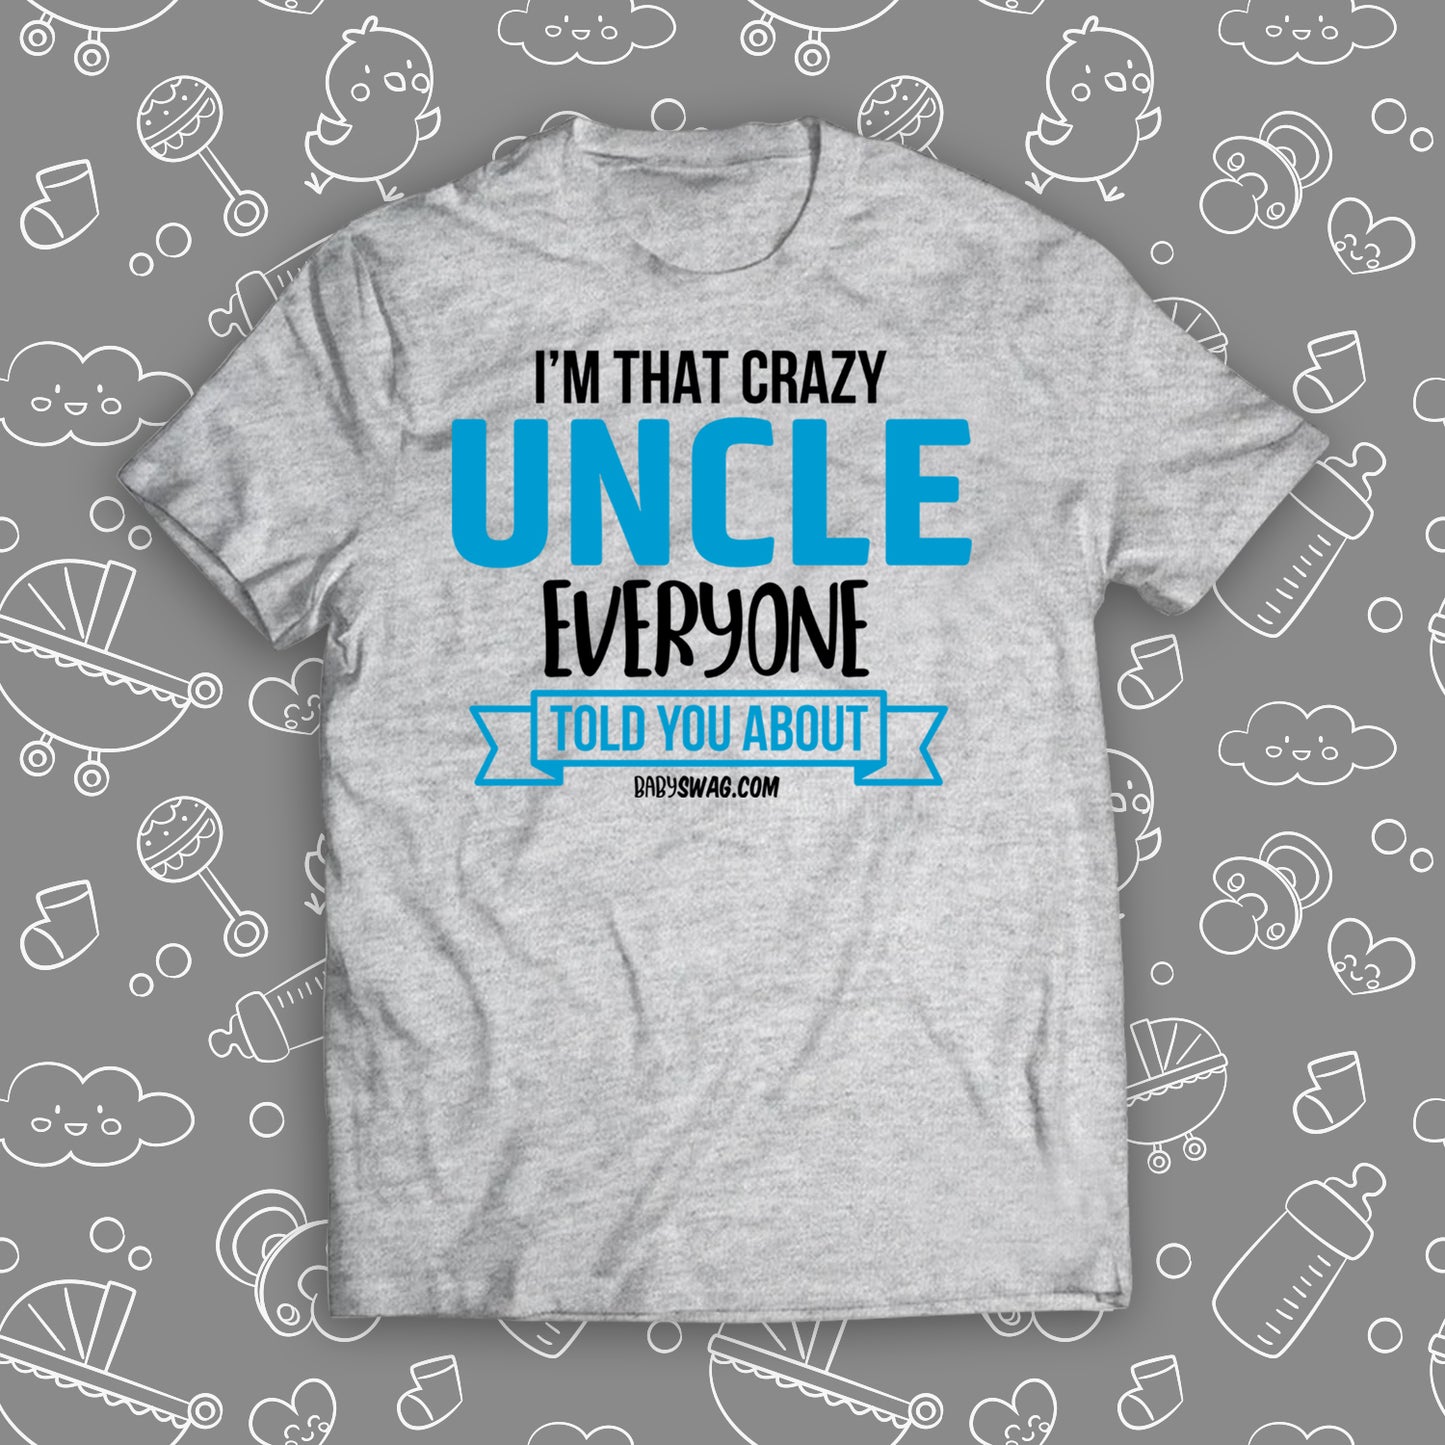 I'm The Crazy Uncle Everyone Told You About